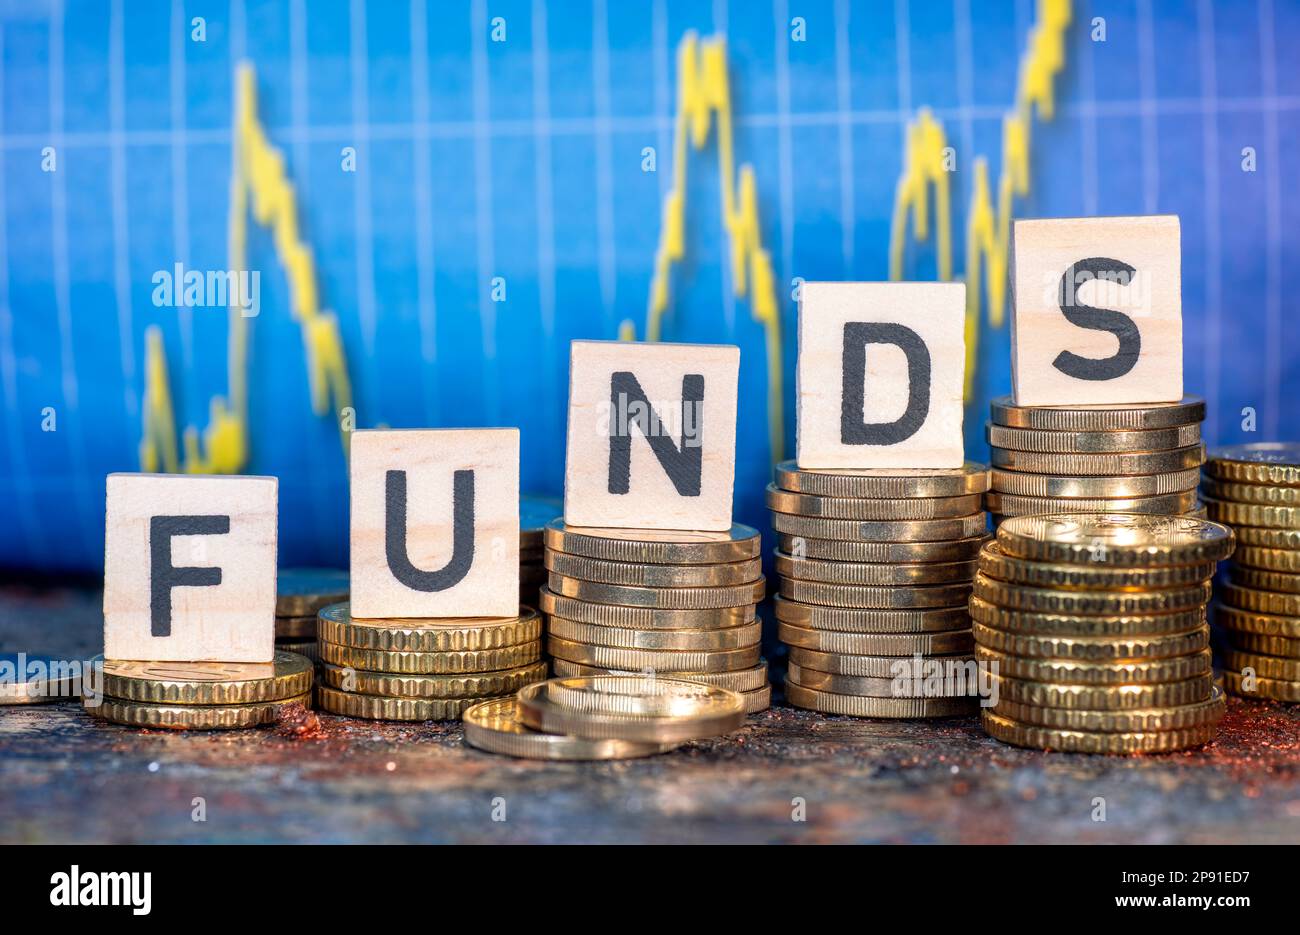 Several stacks of coins and the term Funds and a chart with stock prices. Stock Photo